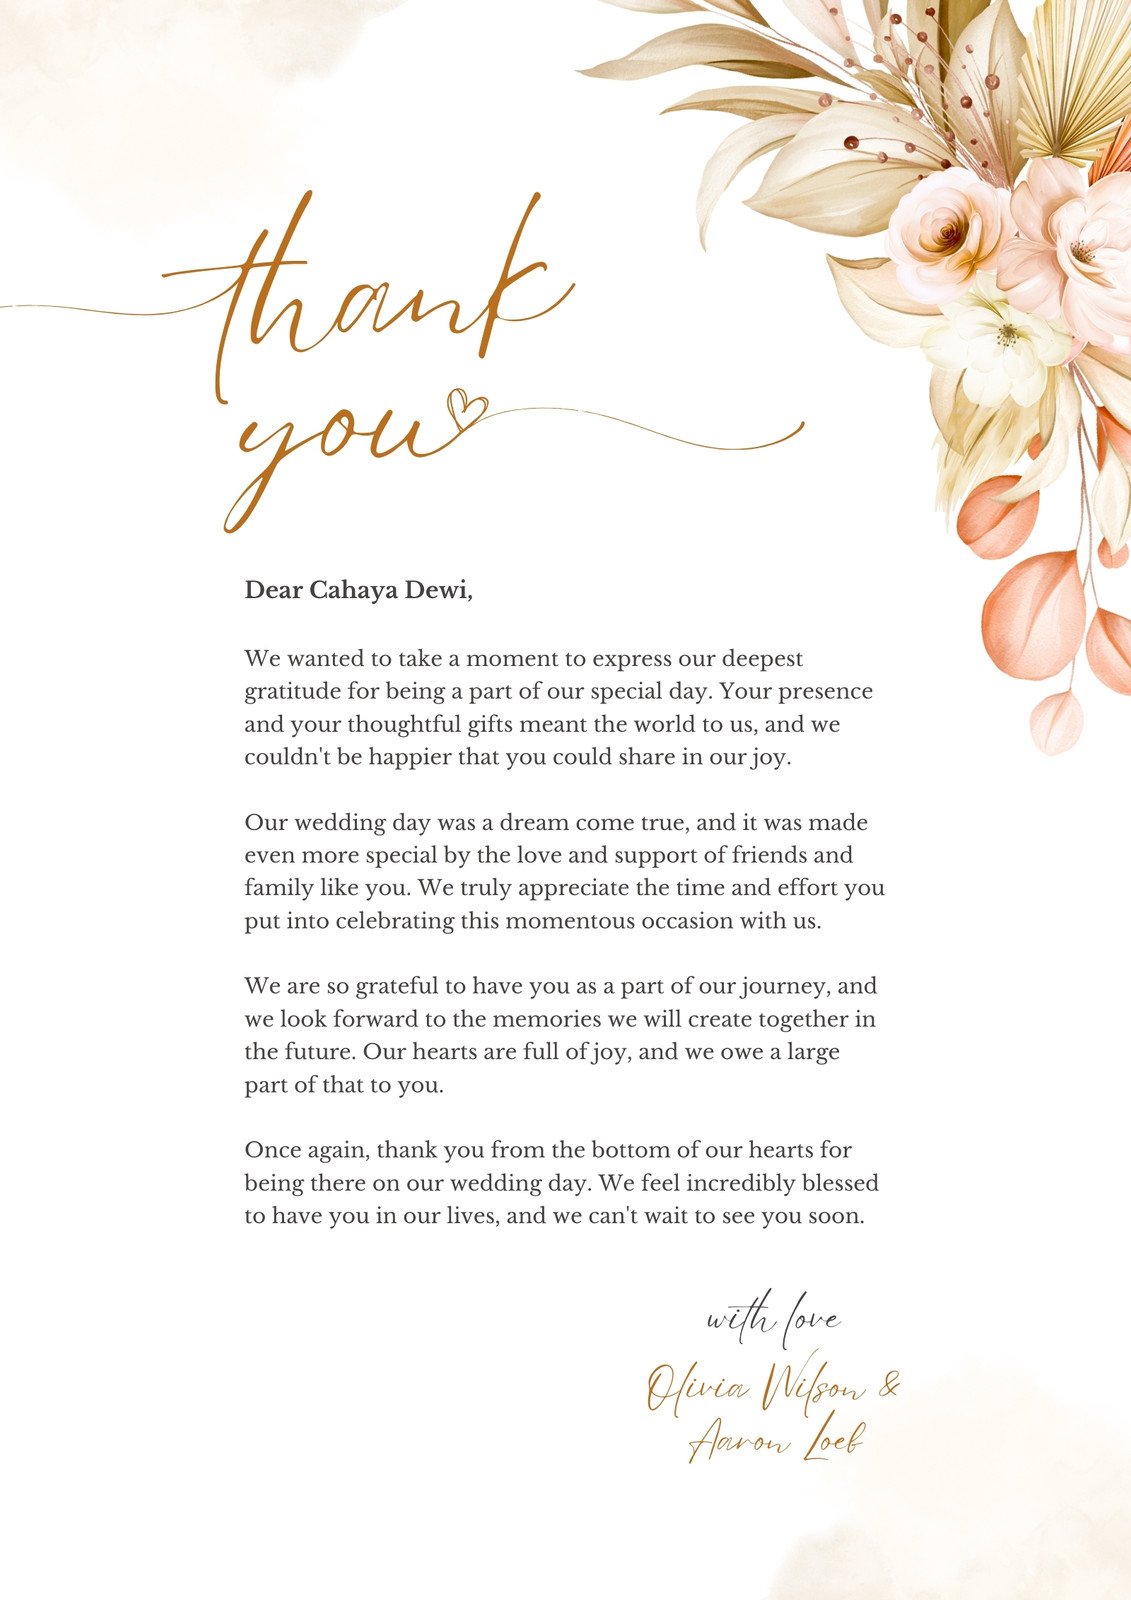 Thank you letter from recipient of Mary's tissue donation | AnnaLeah & Mary